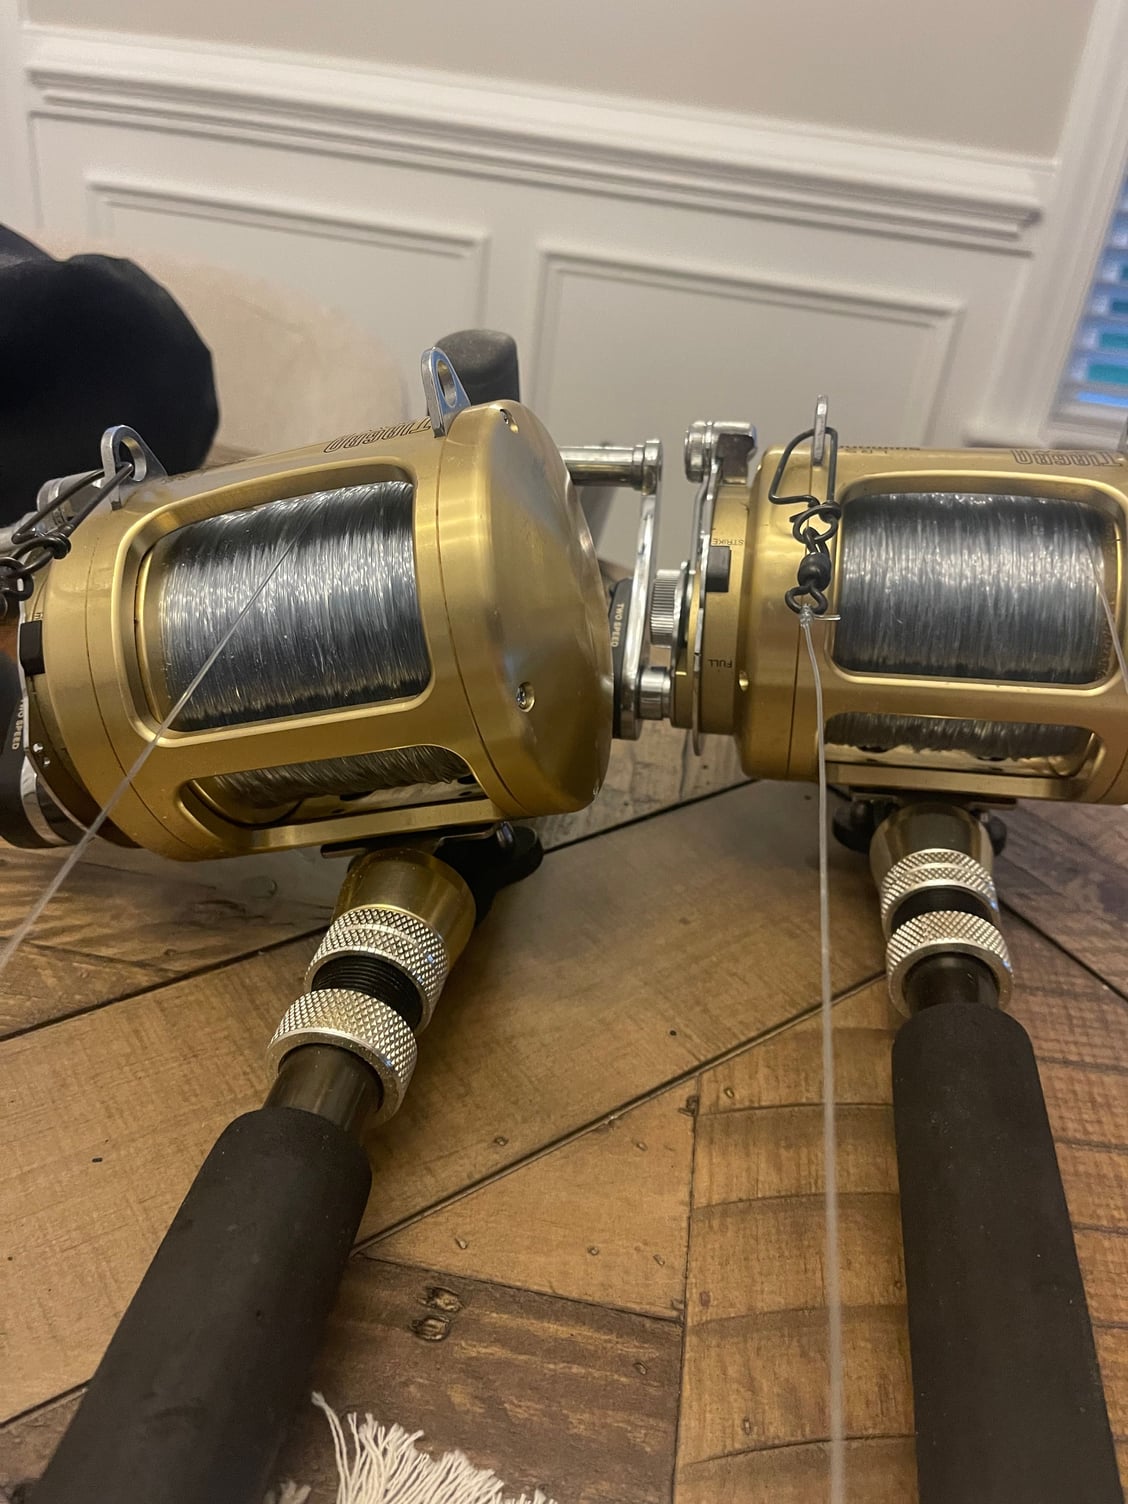 Shimano tiagra 30w chaos rods - The Hull Truth - Boating and